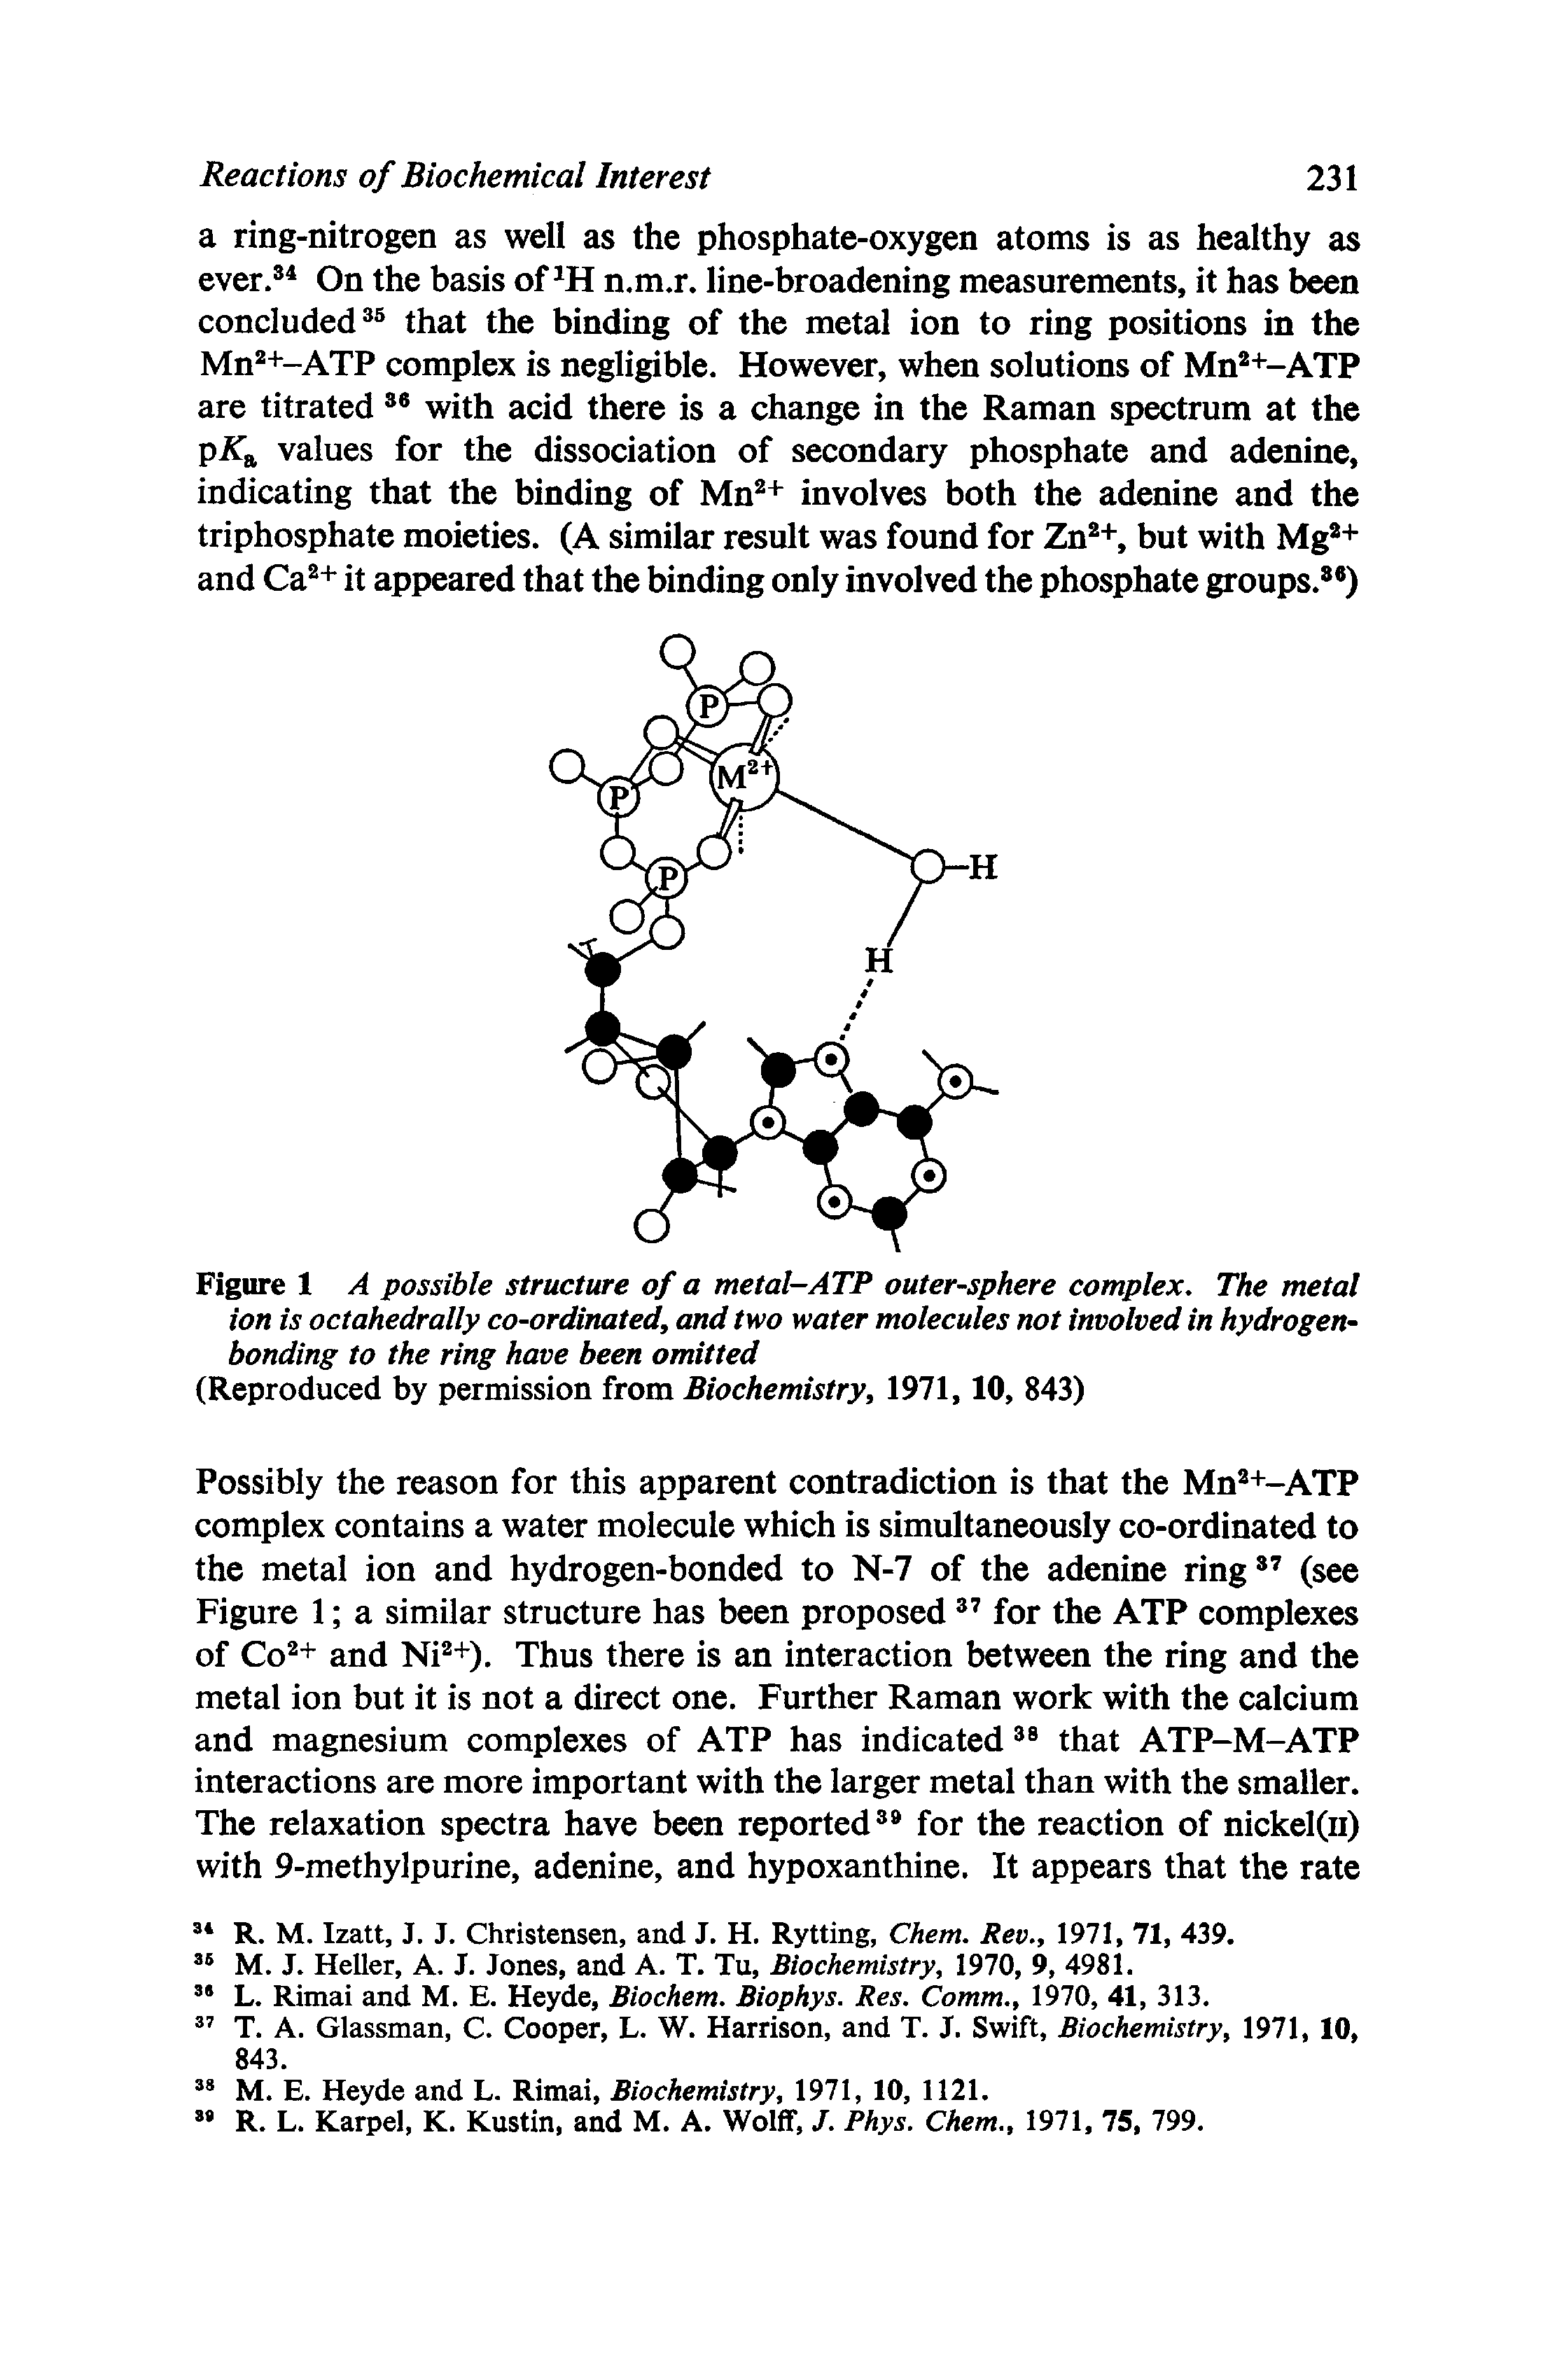 Figure 1 A possible structure of a metal-ATP outer-sphere complex. The metal ion is octahedrally co-ordinated, and two water molecules not involved in hydrogenbonding to the ring have been omitted (Reproduced by permission from Biochemistry, 1971,10, 843)...